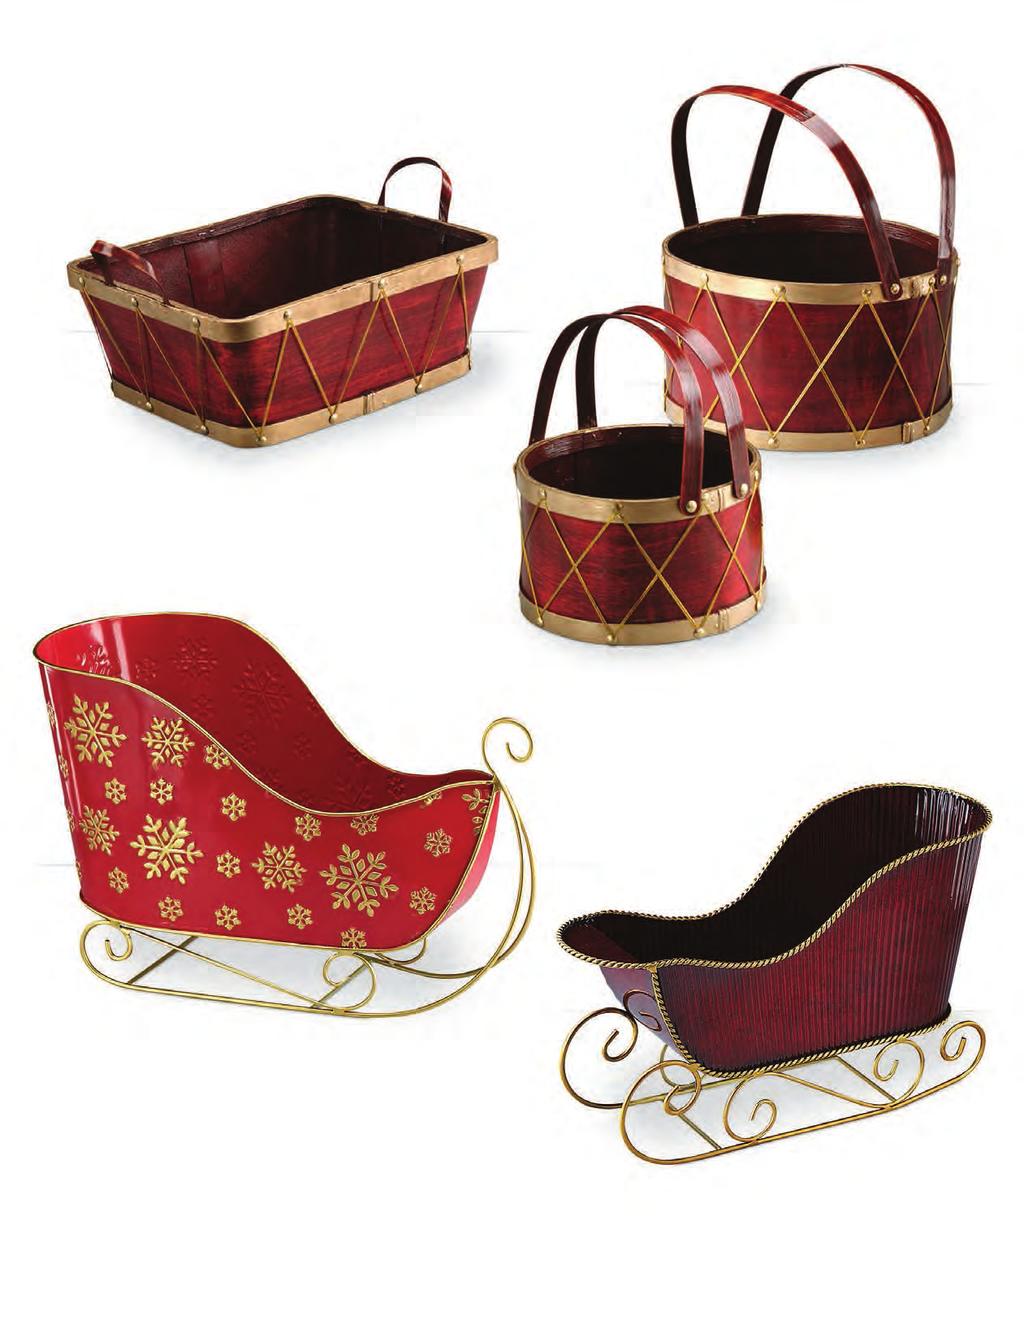 221102 Rectangular Woodchip Container Burgundy with gold trim 11.75 x 9.75 x 4.5 3/$6.49 ea. 221101 Set/2 Woodchip Drum Burgundy with gold trim and drop-down handles Large: 9 x 4.